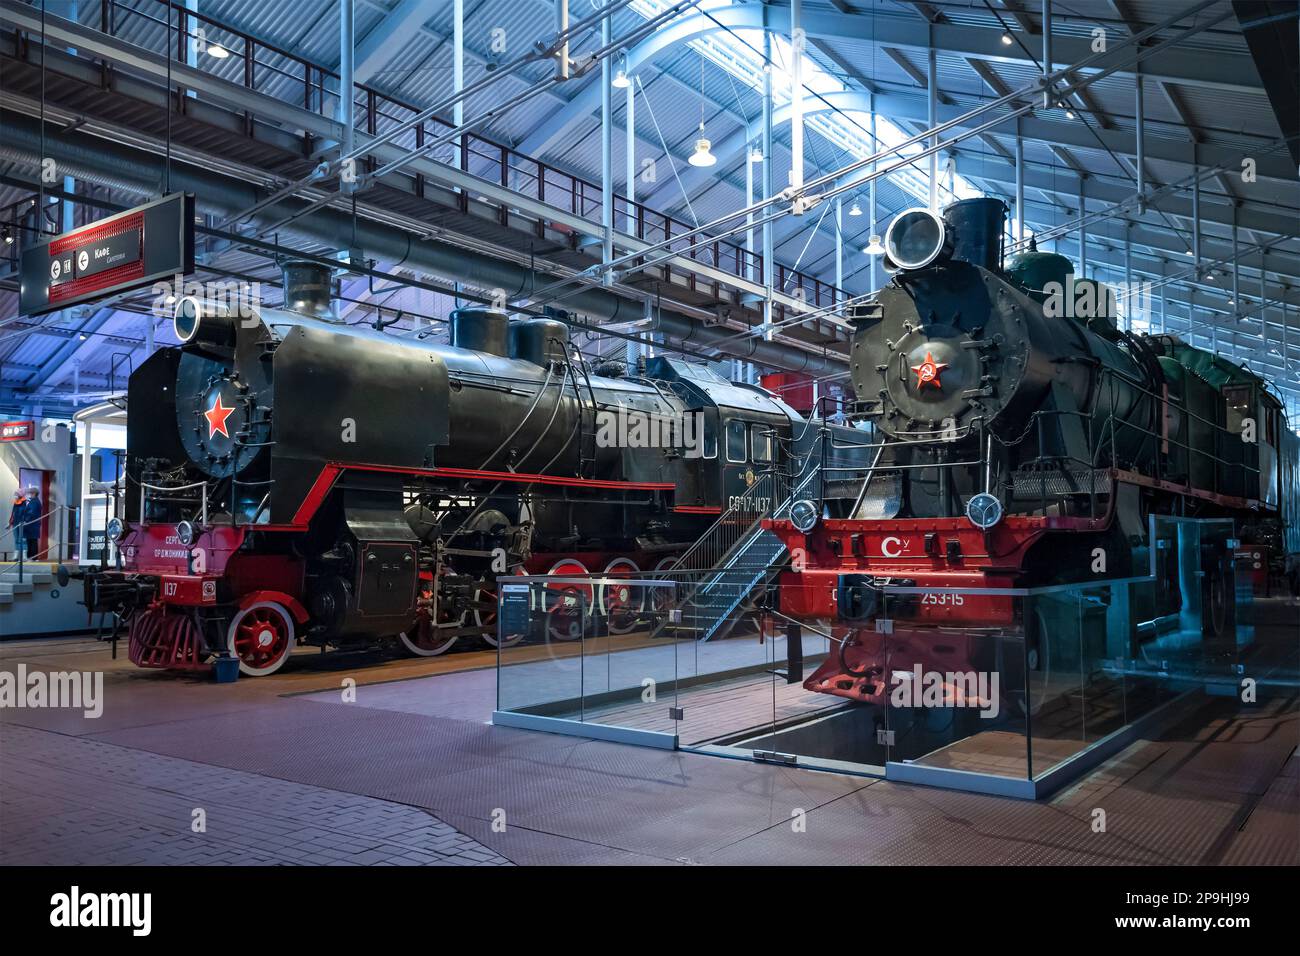 SAINT PETERSBURG, RUSSIA - JANUARY 12, 2022: Two old Russian/Soviet steam locomotives in the Museum of Railways of Russia Stock Photo